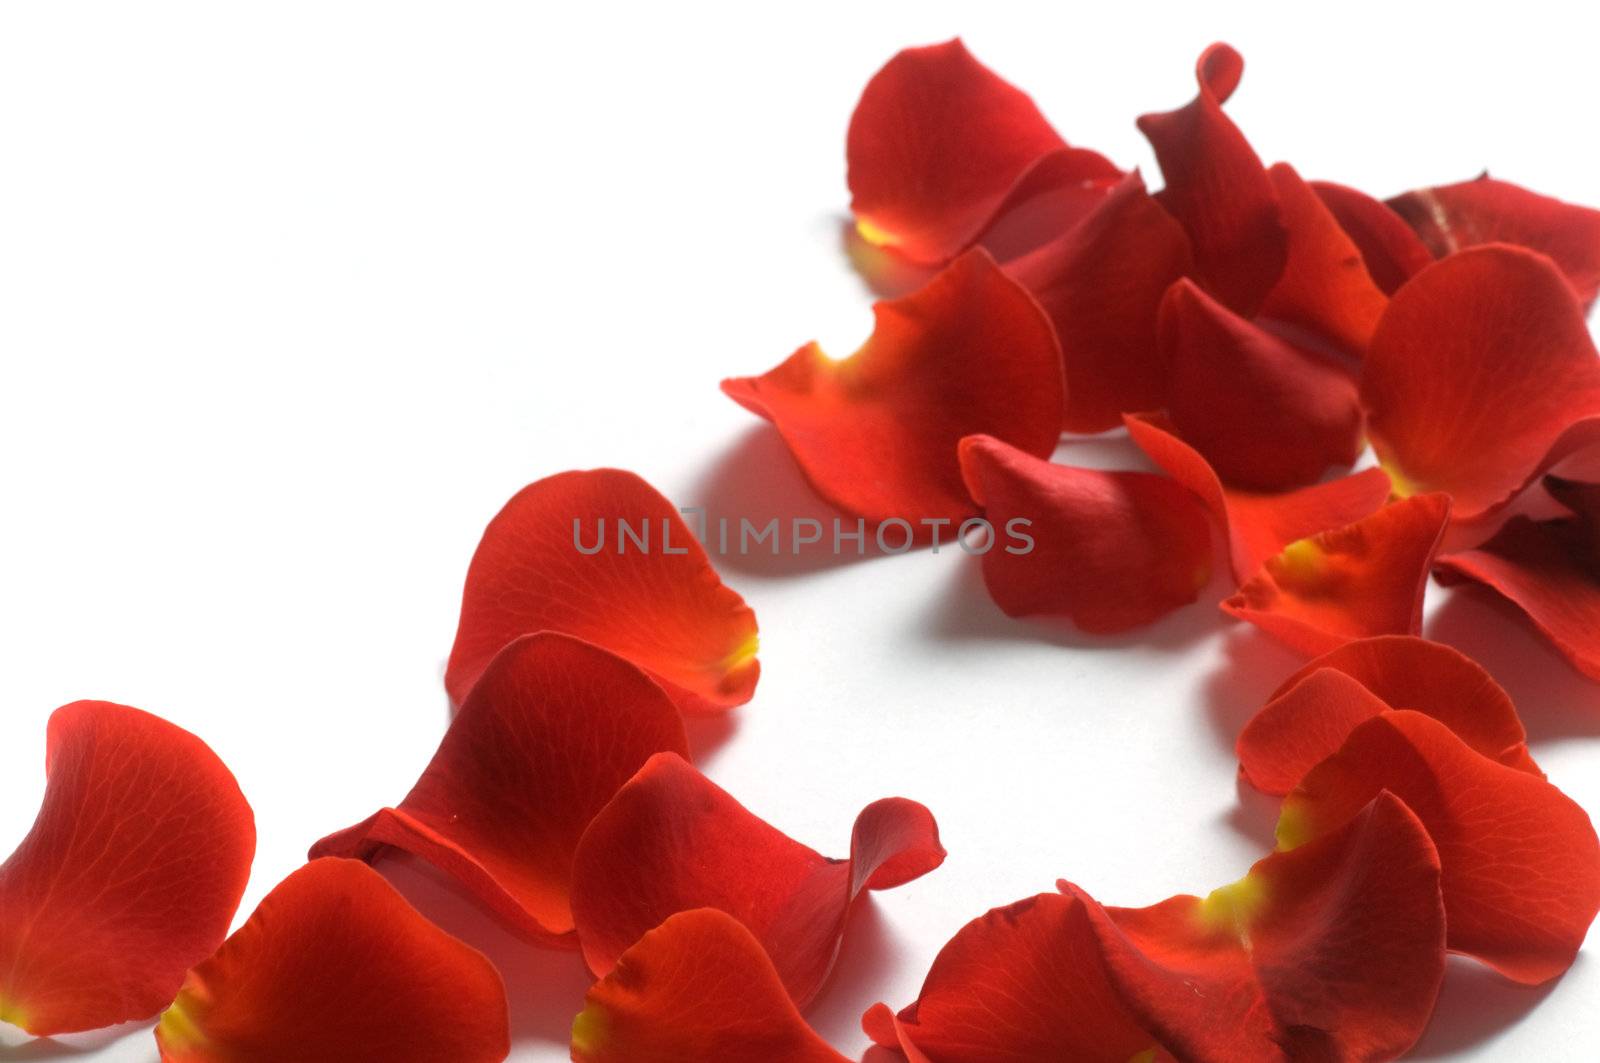 Rose petals on white background by photocreo